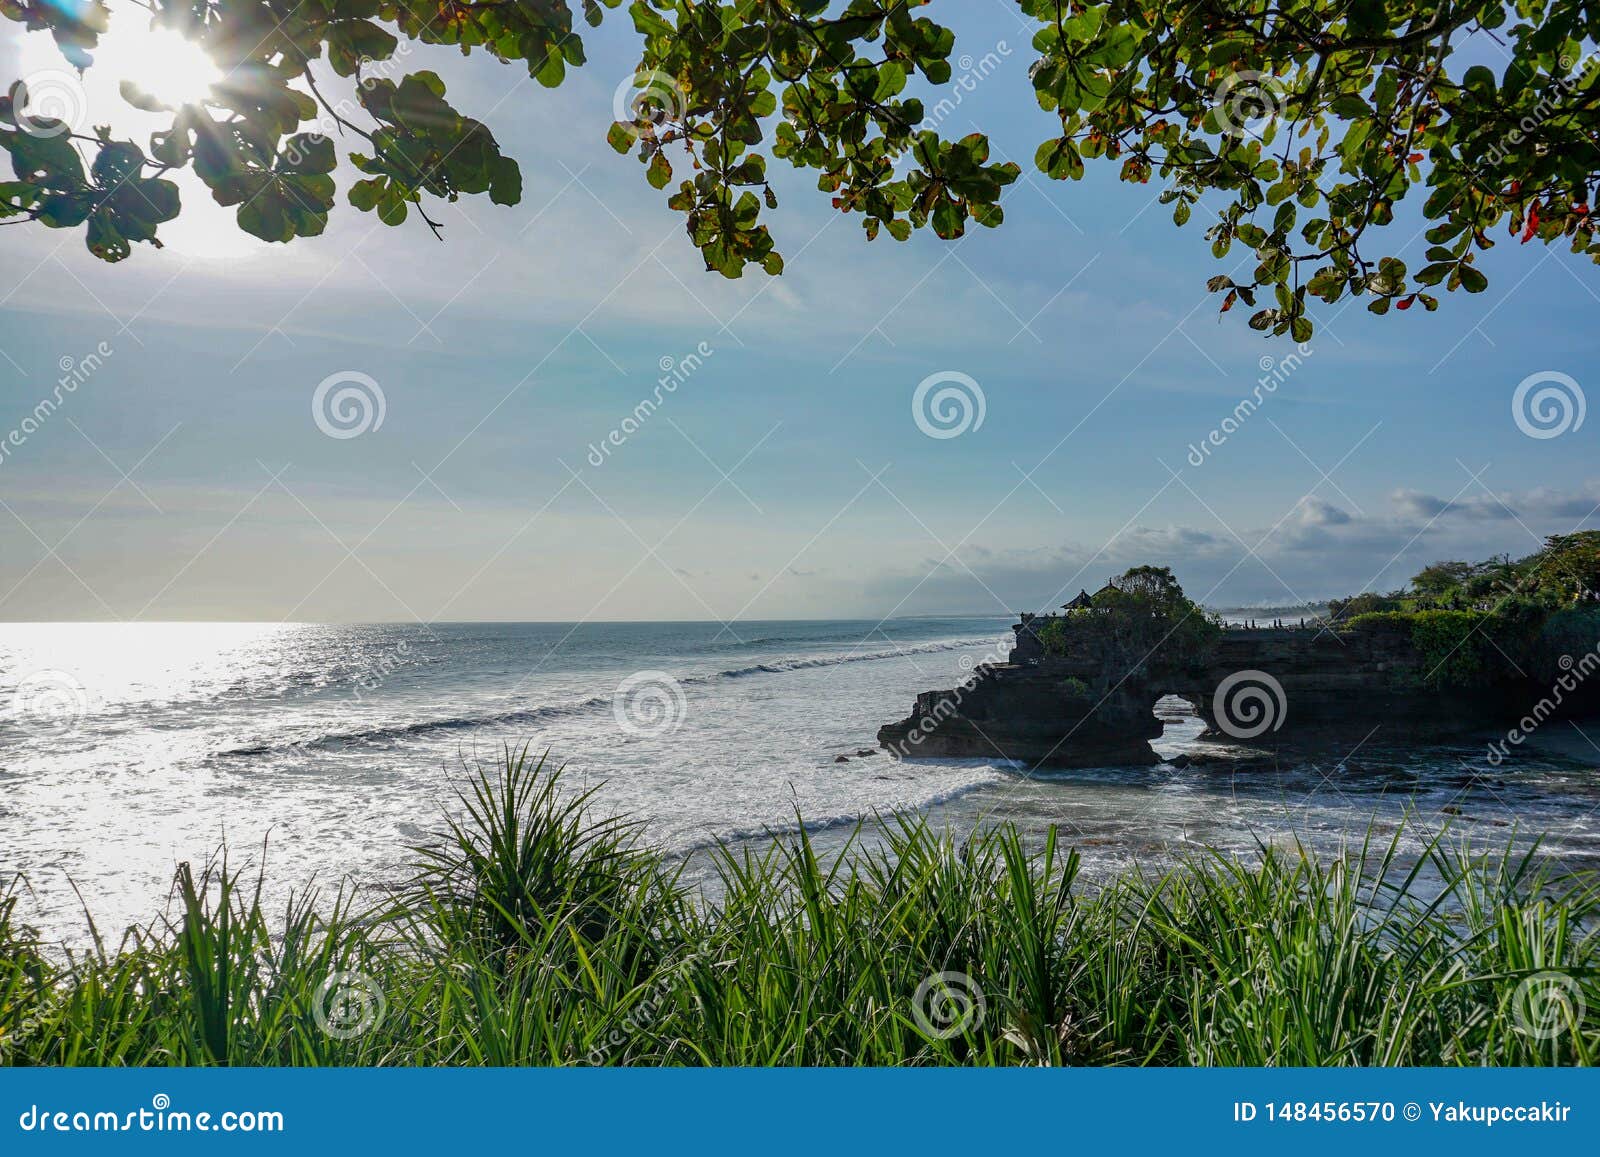 Tanah Lot Temple in Bali Indonesia - Nature and Architecture Stock ...